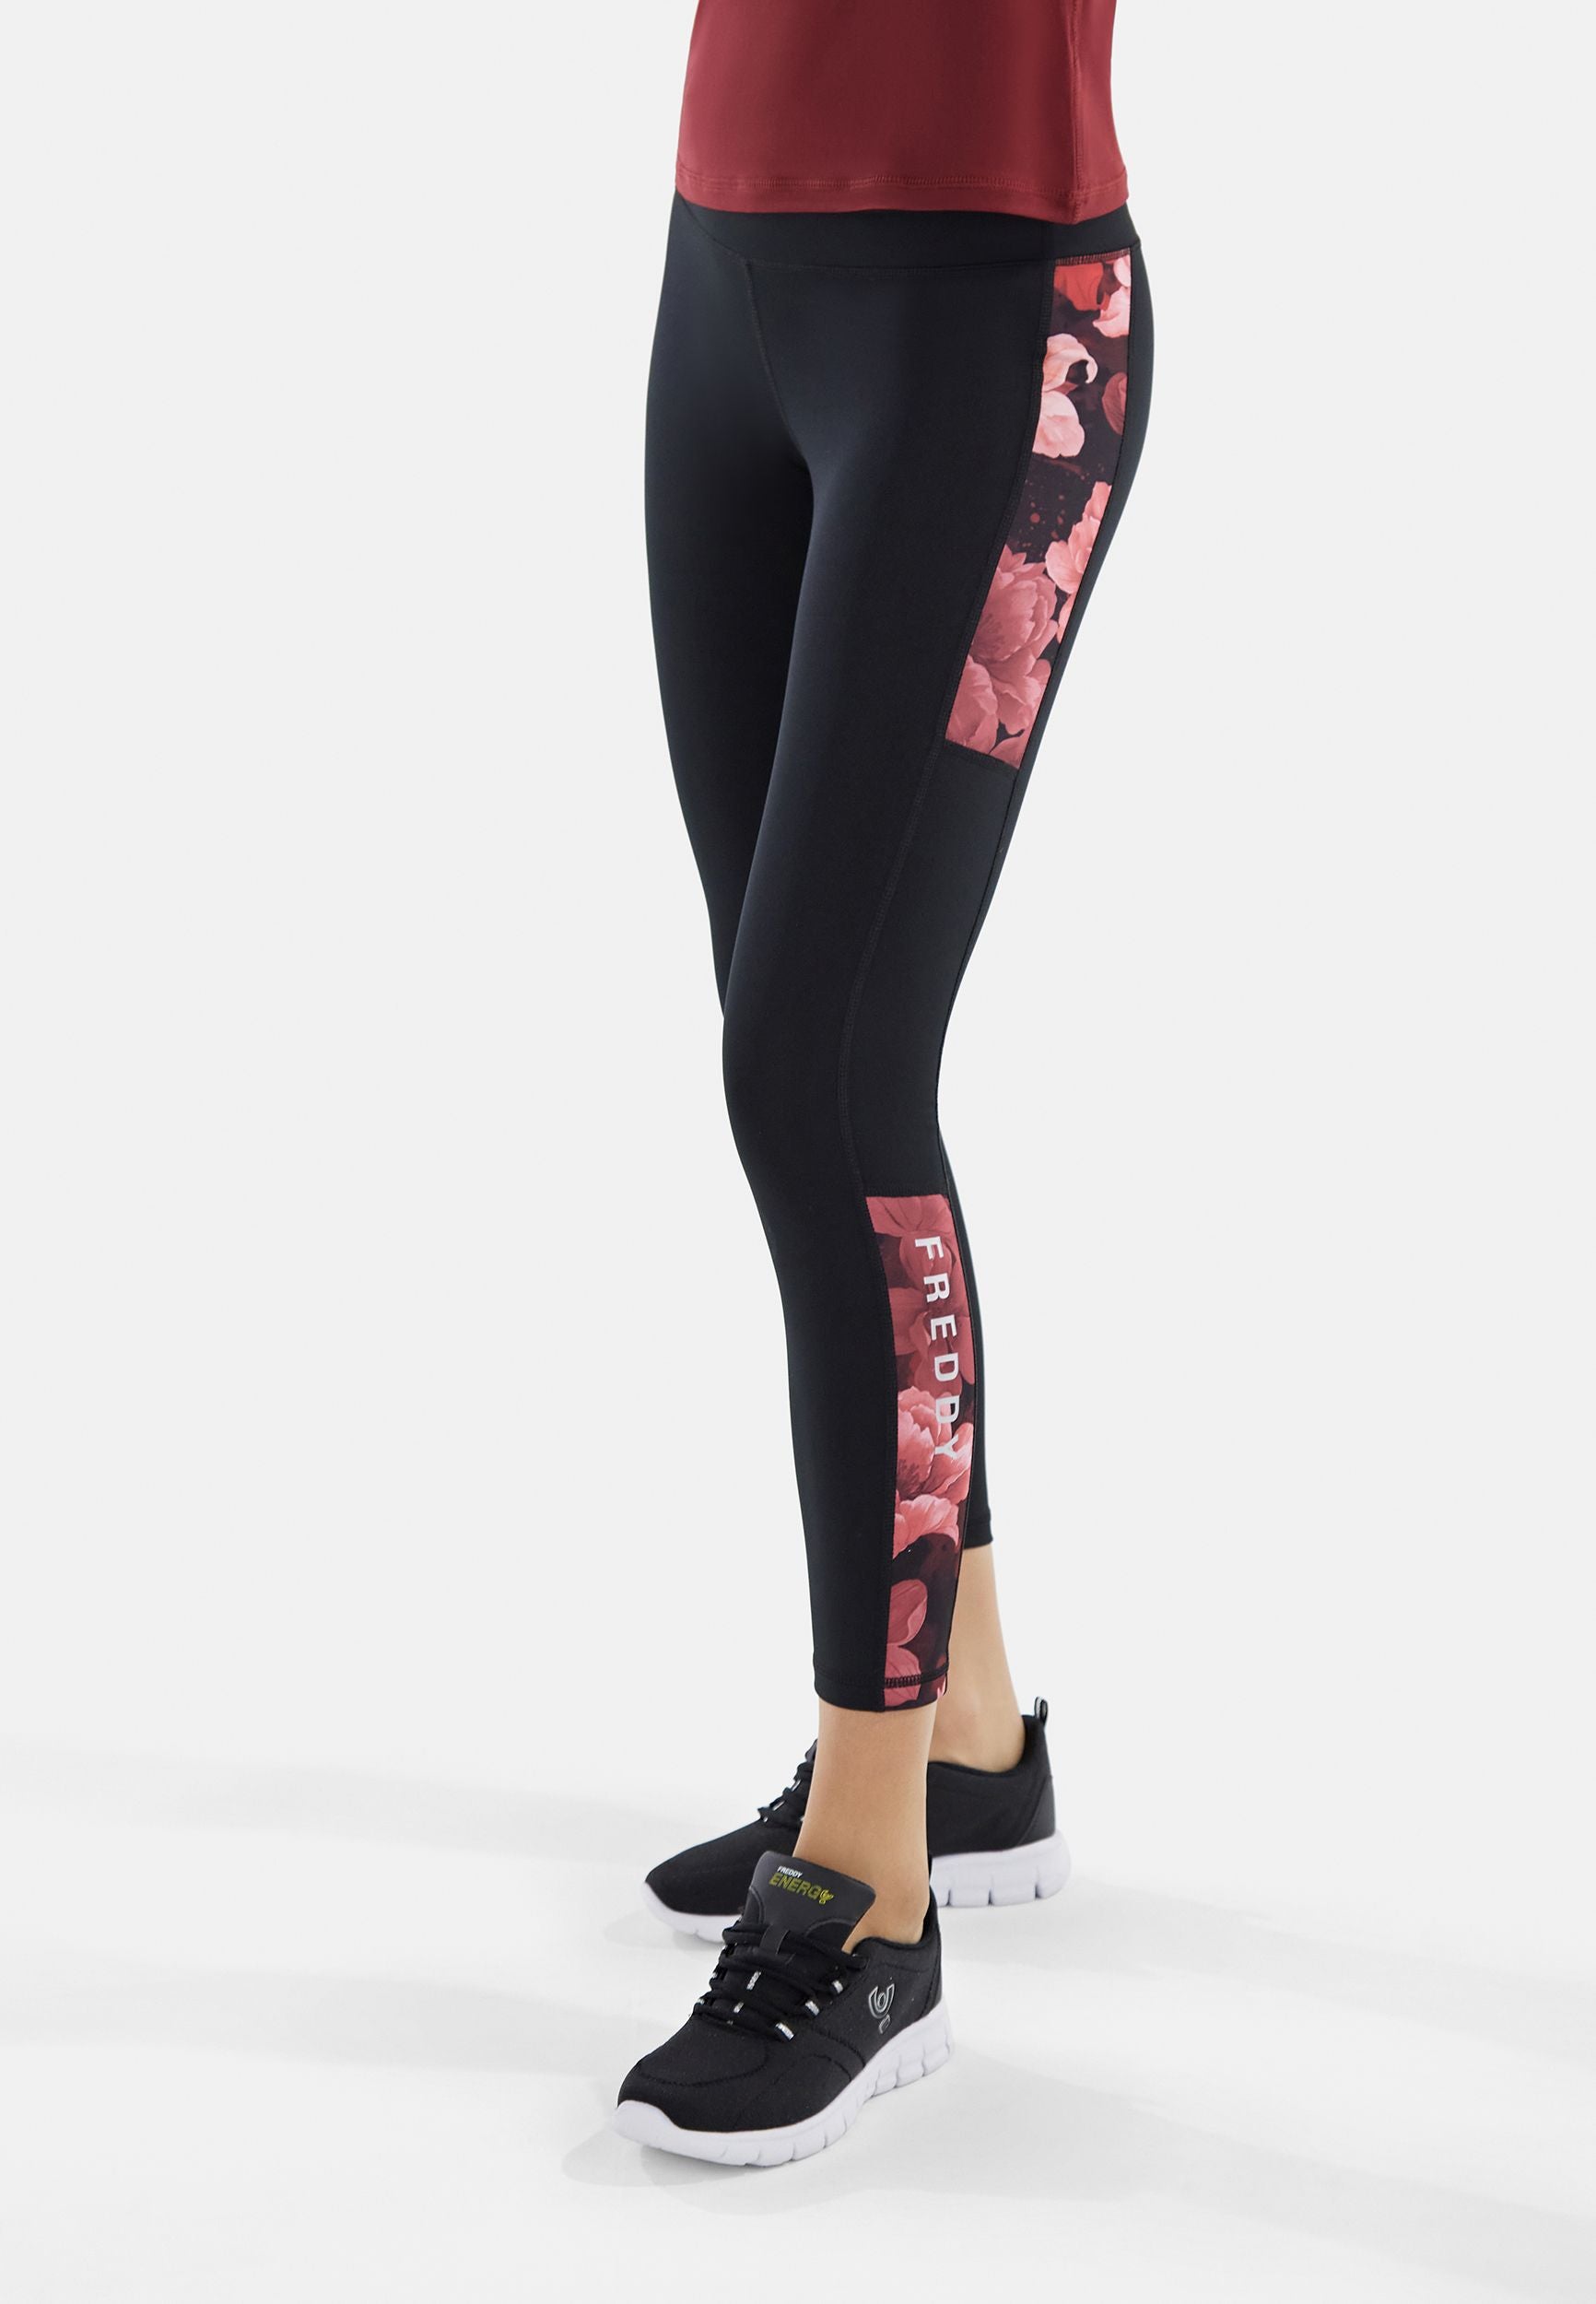 Womens Designer Loose Fit Leggings For Jogging, Running, And Stretchy New  Feet From Fashiontrend_store, $20.95